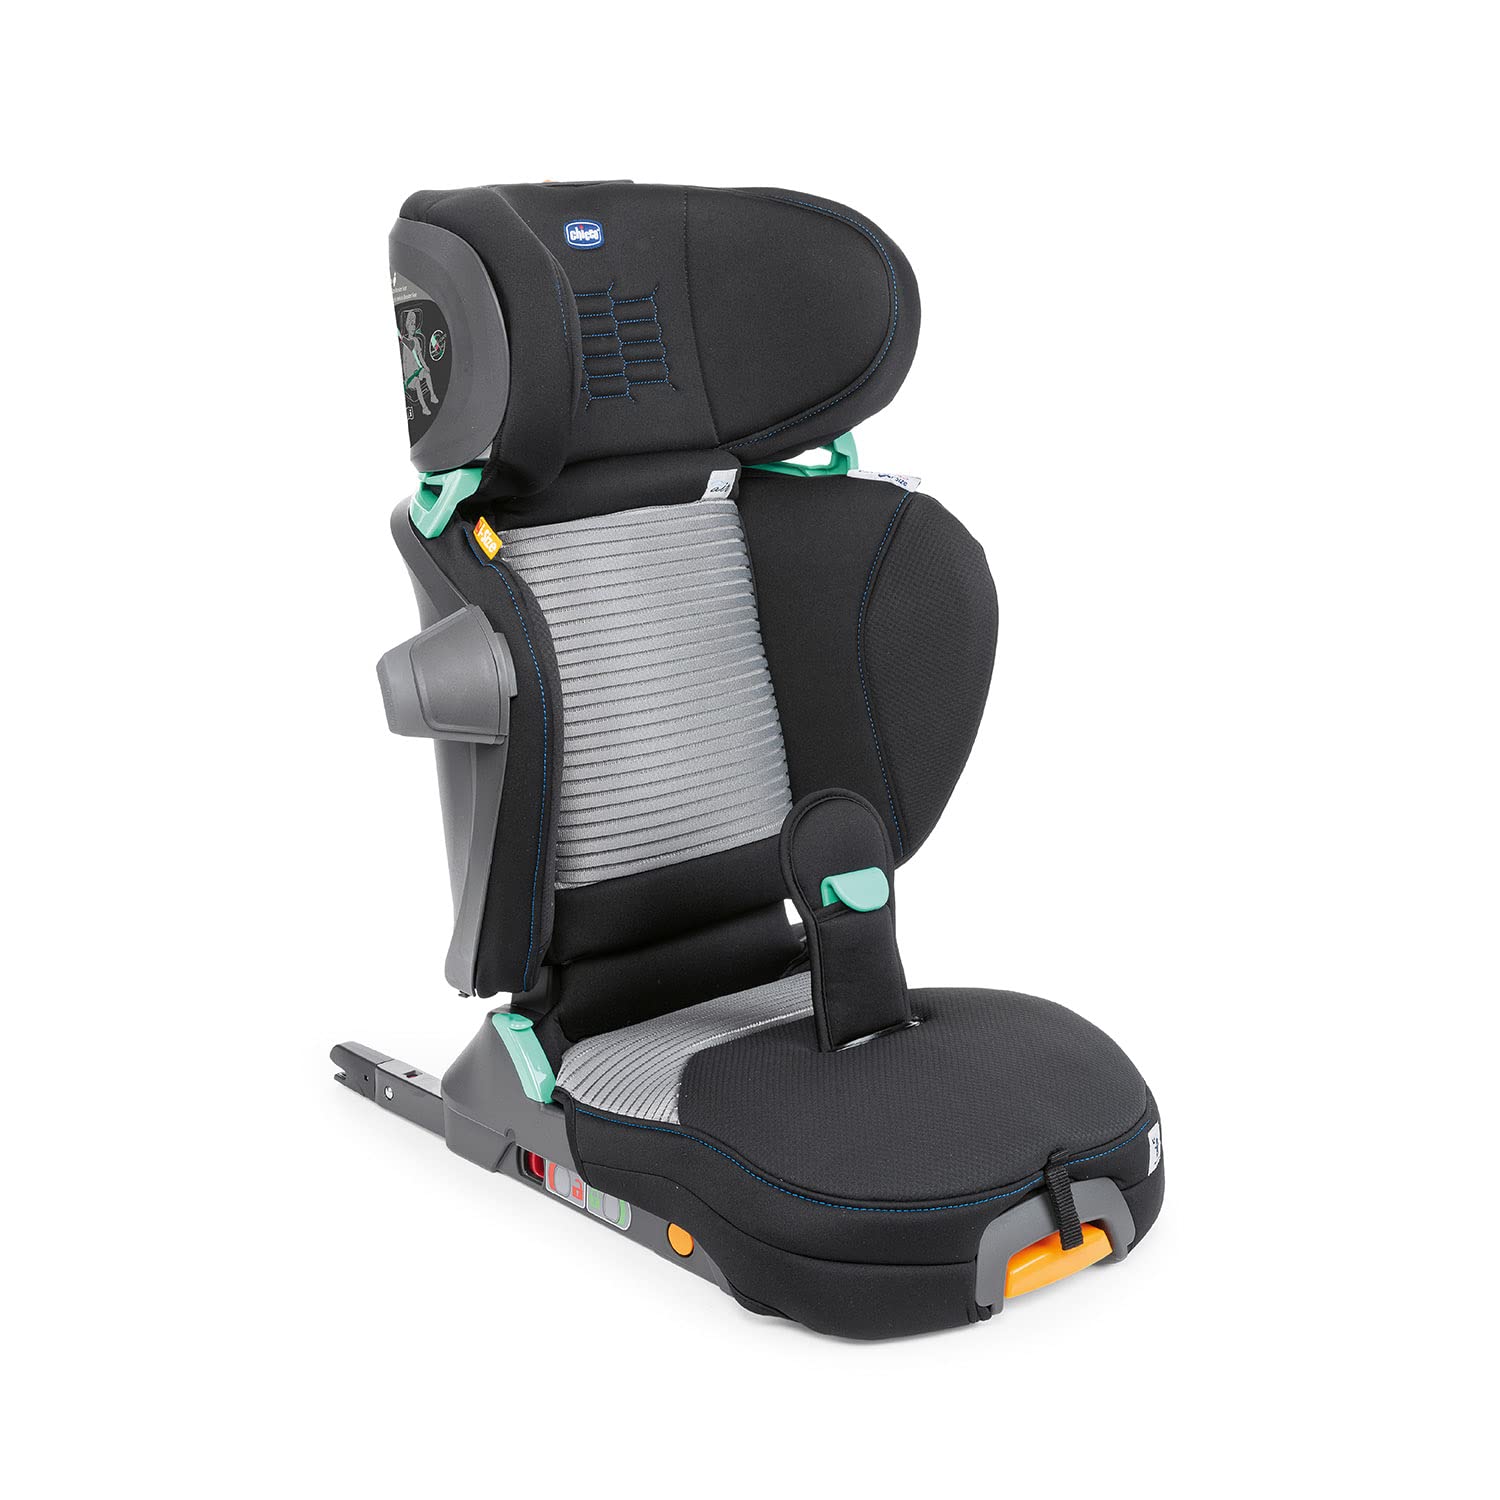 Chicco Fold & Go Air i-Size Car Seat 100-150 cm, Adjustable Child Car Seat for Children from Approx. 3-12 Years (Approx. 15-36 kg), Foldable and Portable, with Side Protection, Adjustable Height and Width